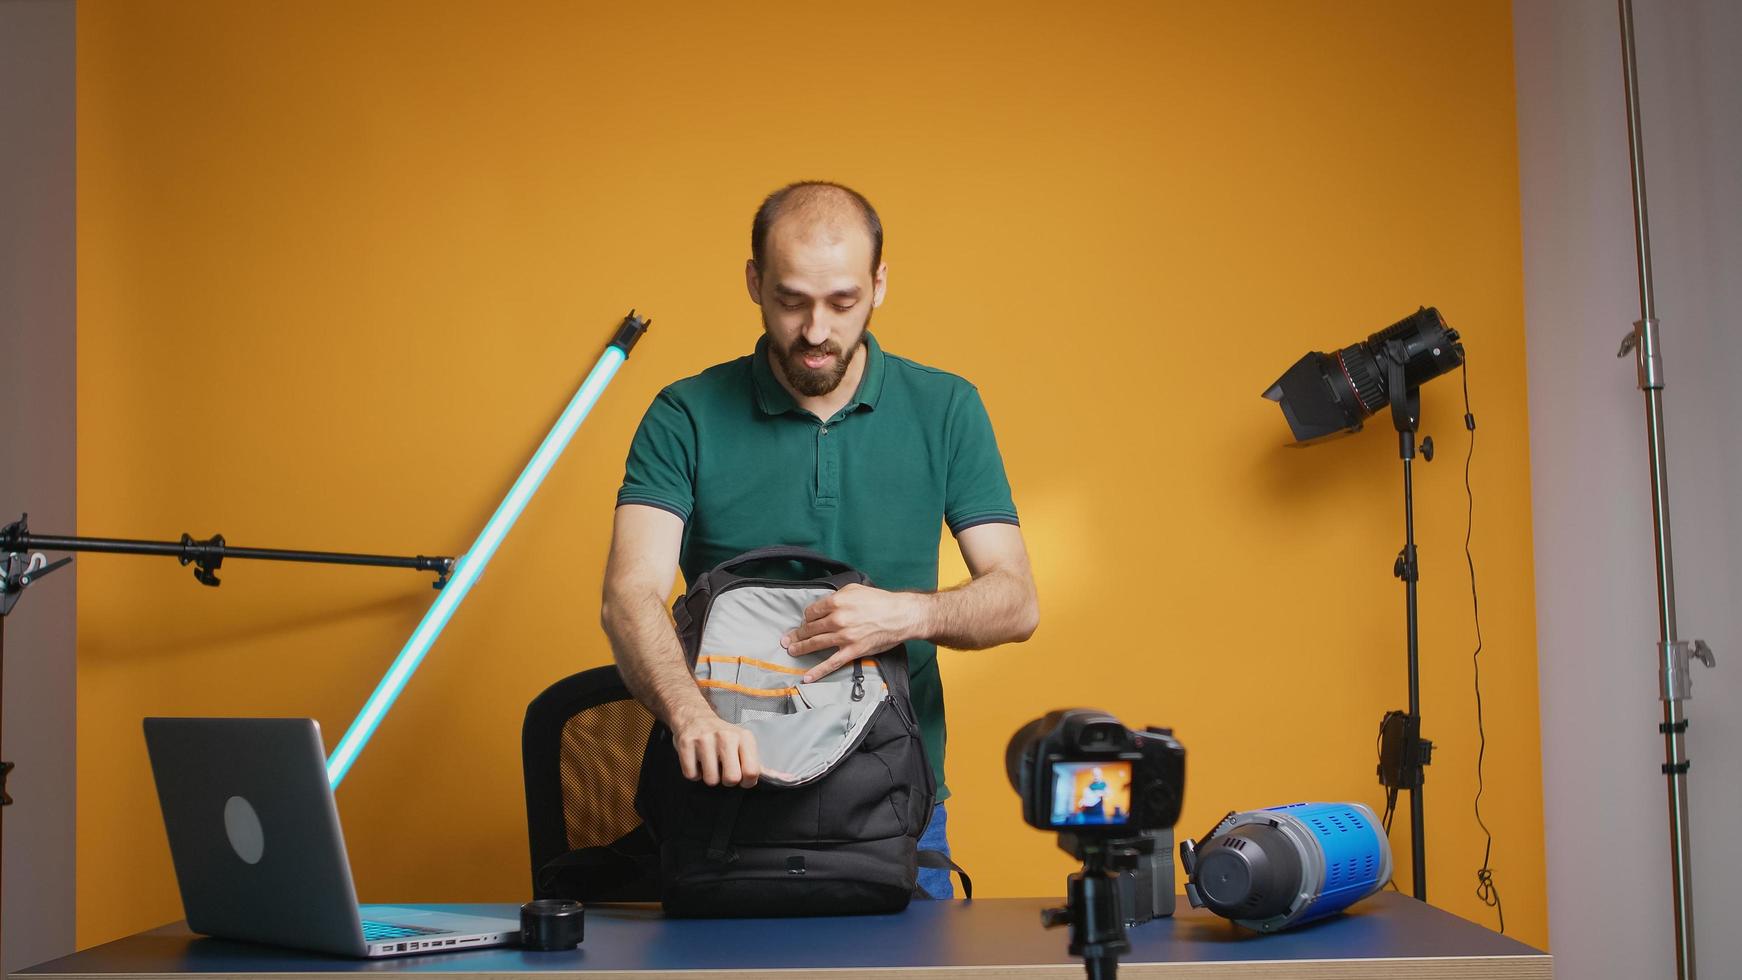 Protographer presenting gear backpack photo